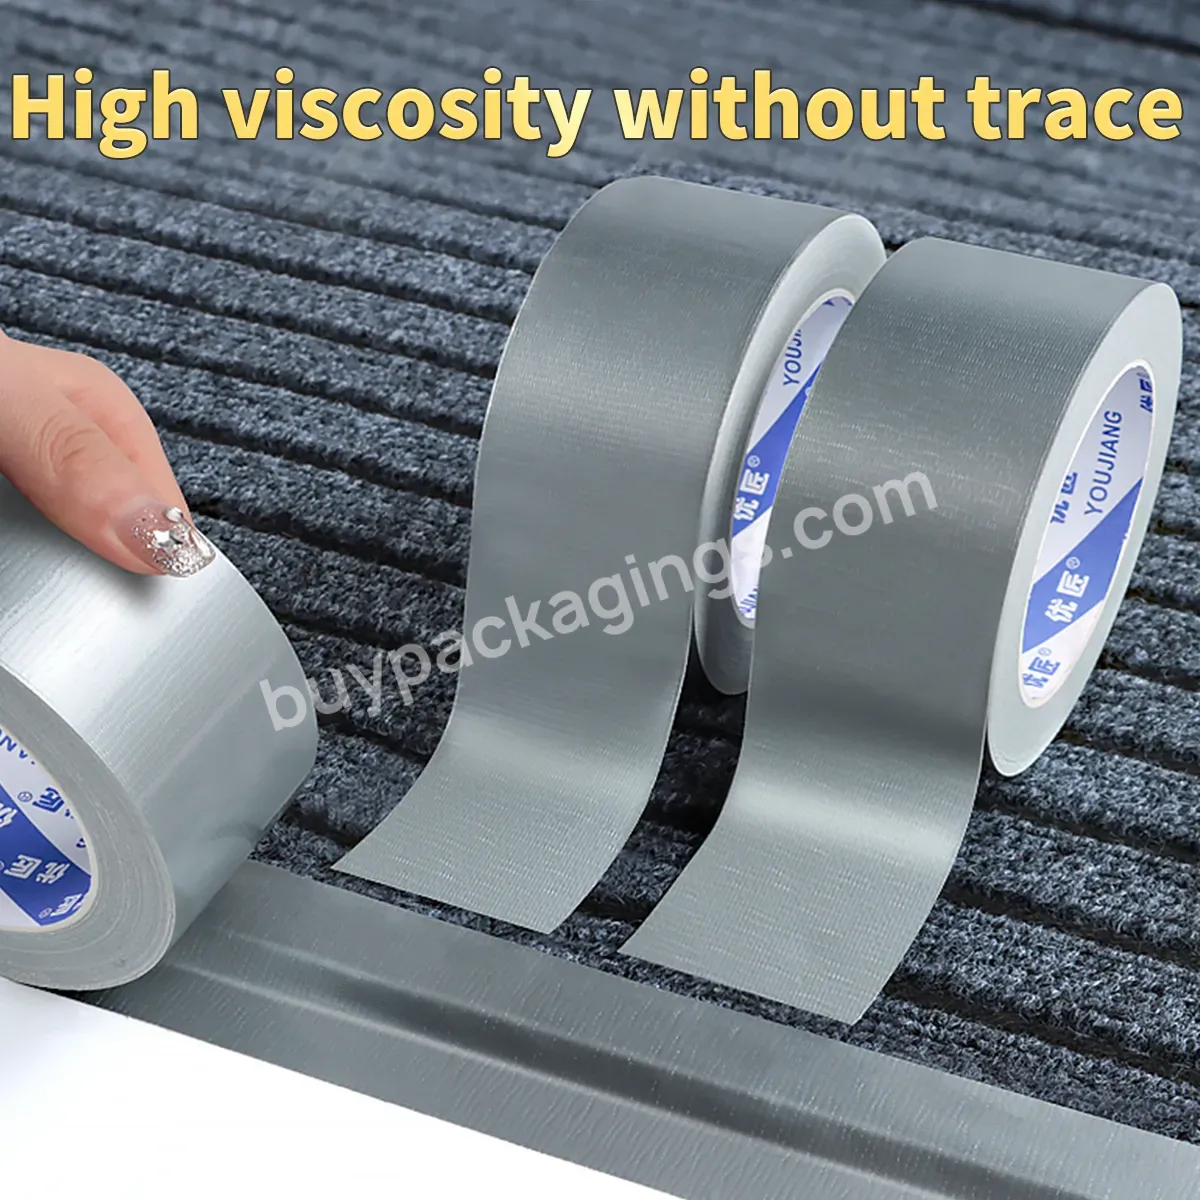 You Jiang Strong Duct Adhesive Cloth Decorative Label Sealing Wide Pe Coated Bondage Seal Flat Premium Tape - Buy High Adhesive Strength Mesh Double-sided Duct Tape,Duct Tape 3939,Resistant Tarpaulin Repair Adhesive Duct Tape.